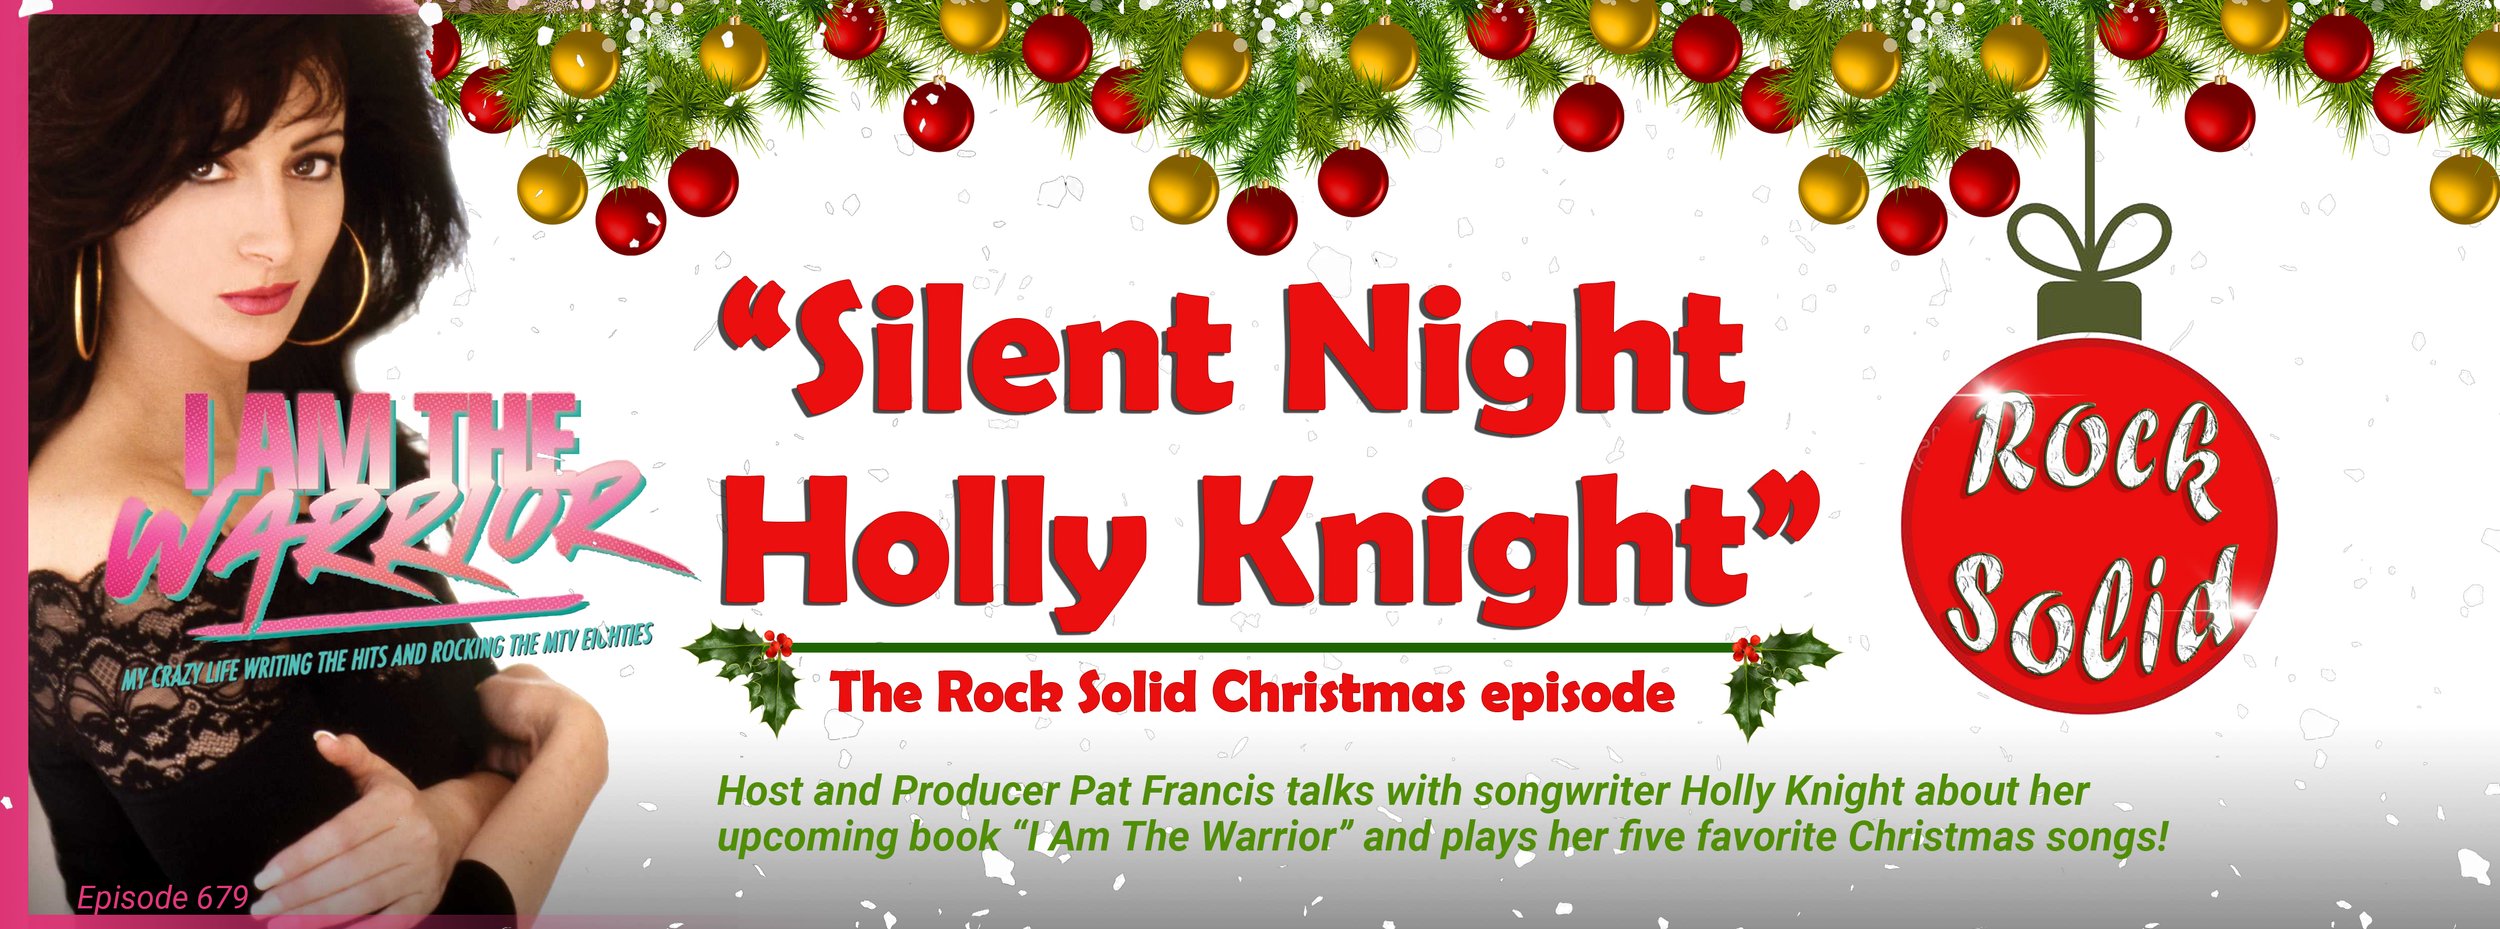 Episode 679 Silent Night Holly Knight — Rock Solid